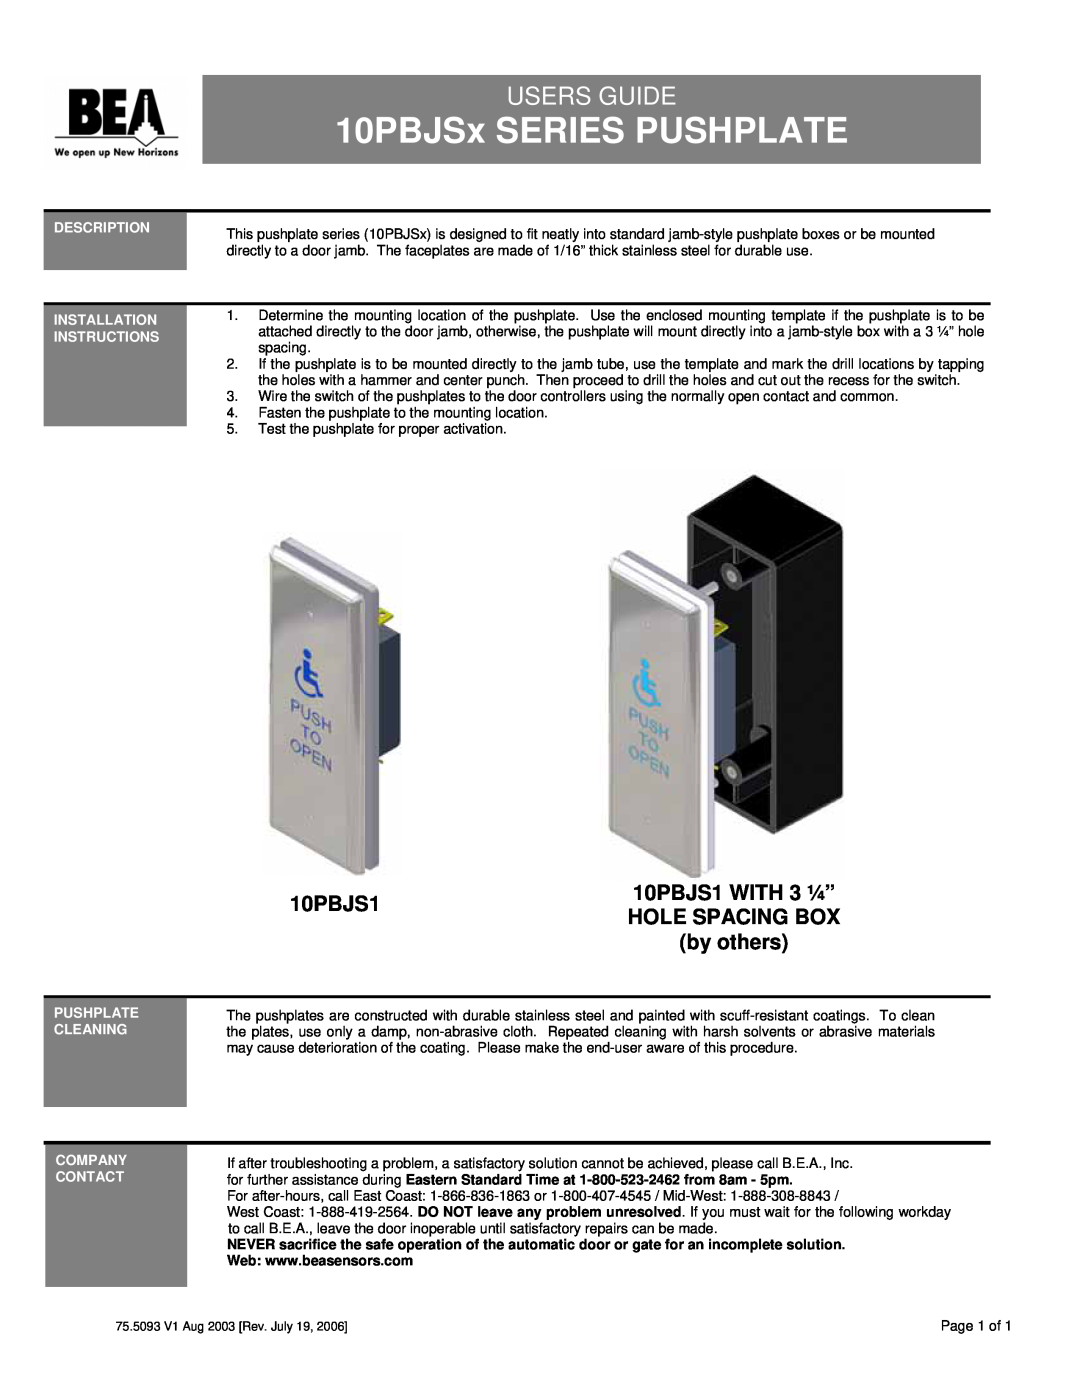 BEA installation instructions 10PBJSx SERIES PUSHPLATE, Users Guide, 10PBJS1 WITH 3 ¼”, Hole Spacing Box, by others 